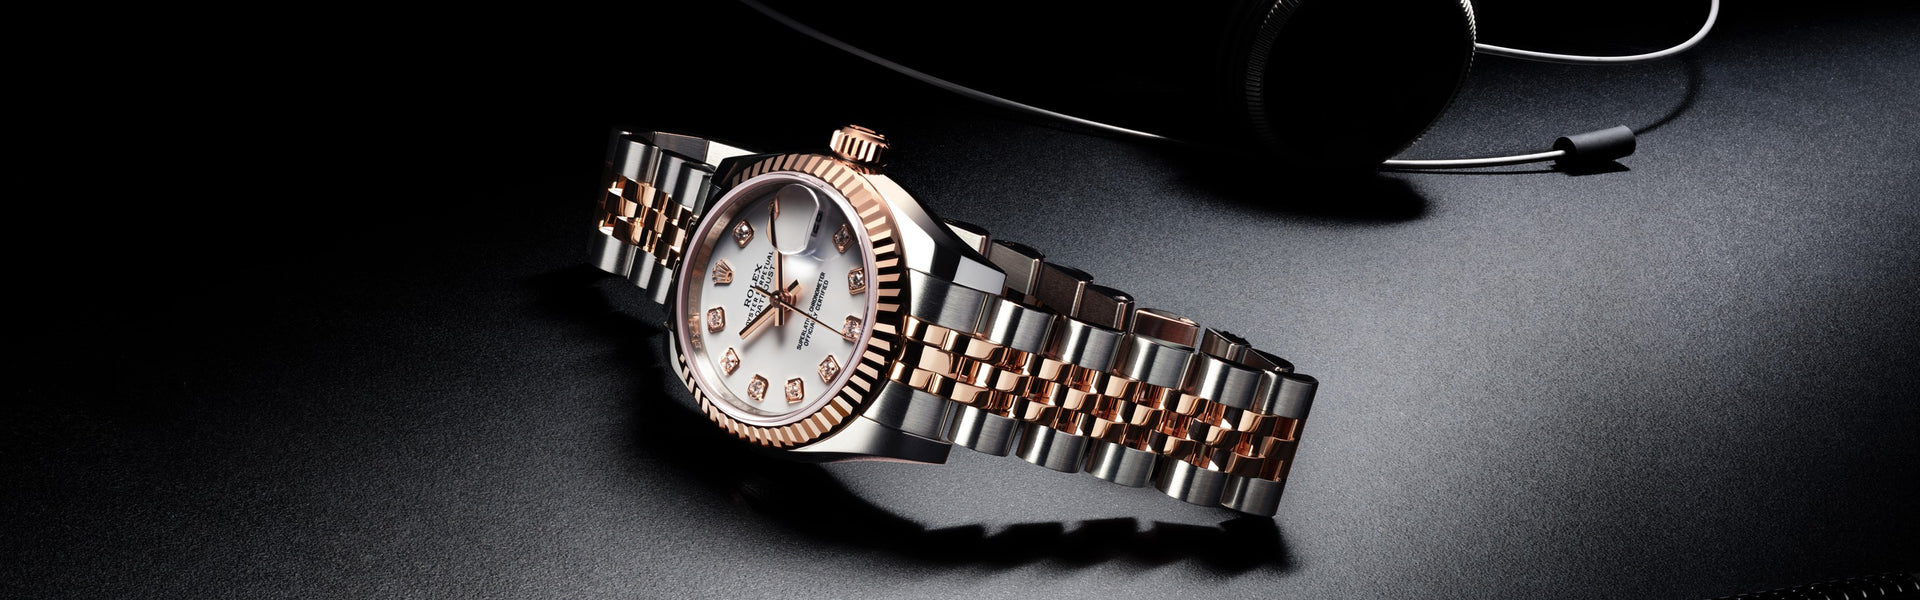 Certified Pre Owned Rolex in White and Rose Gold with White Dial on Black Background